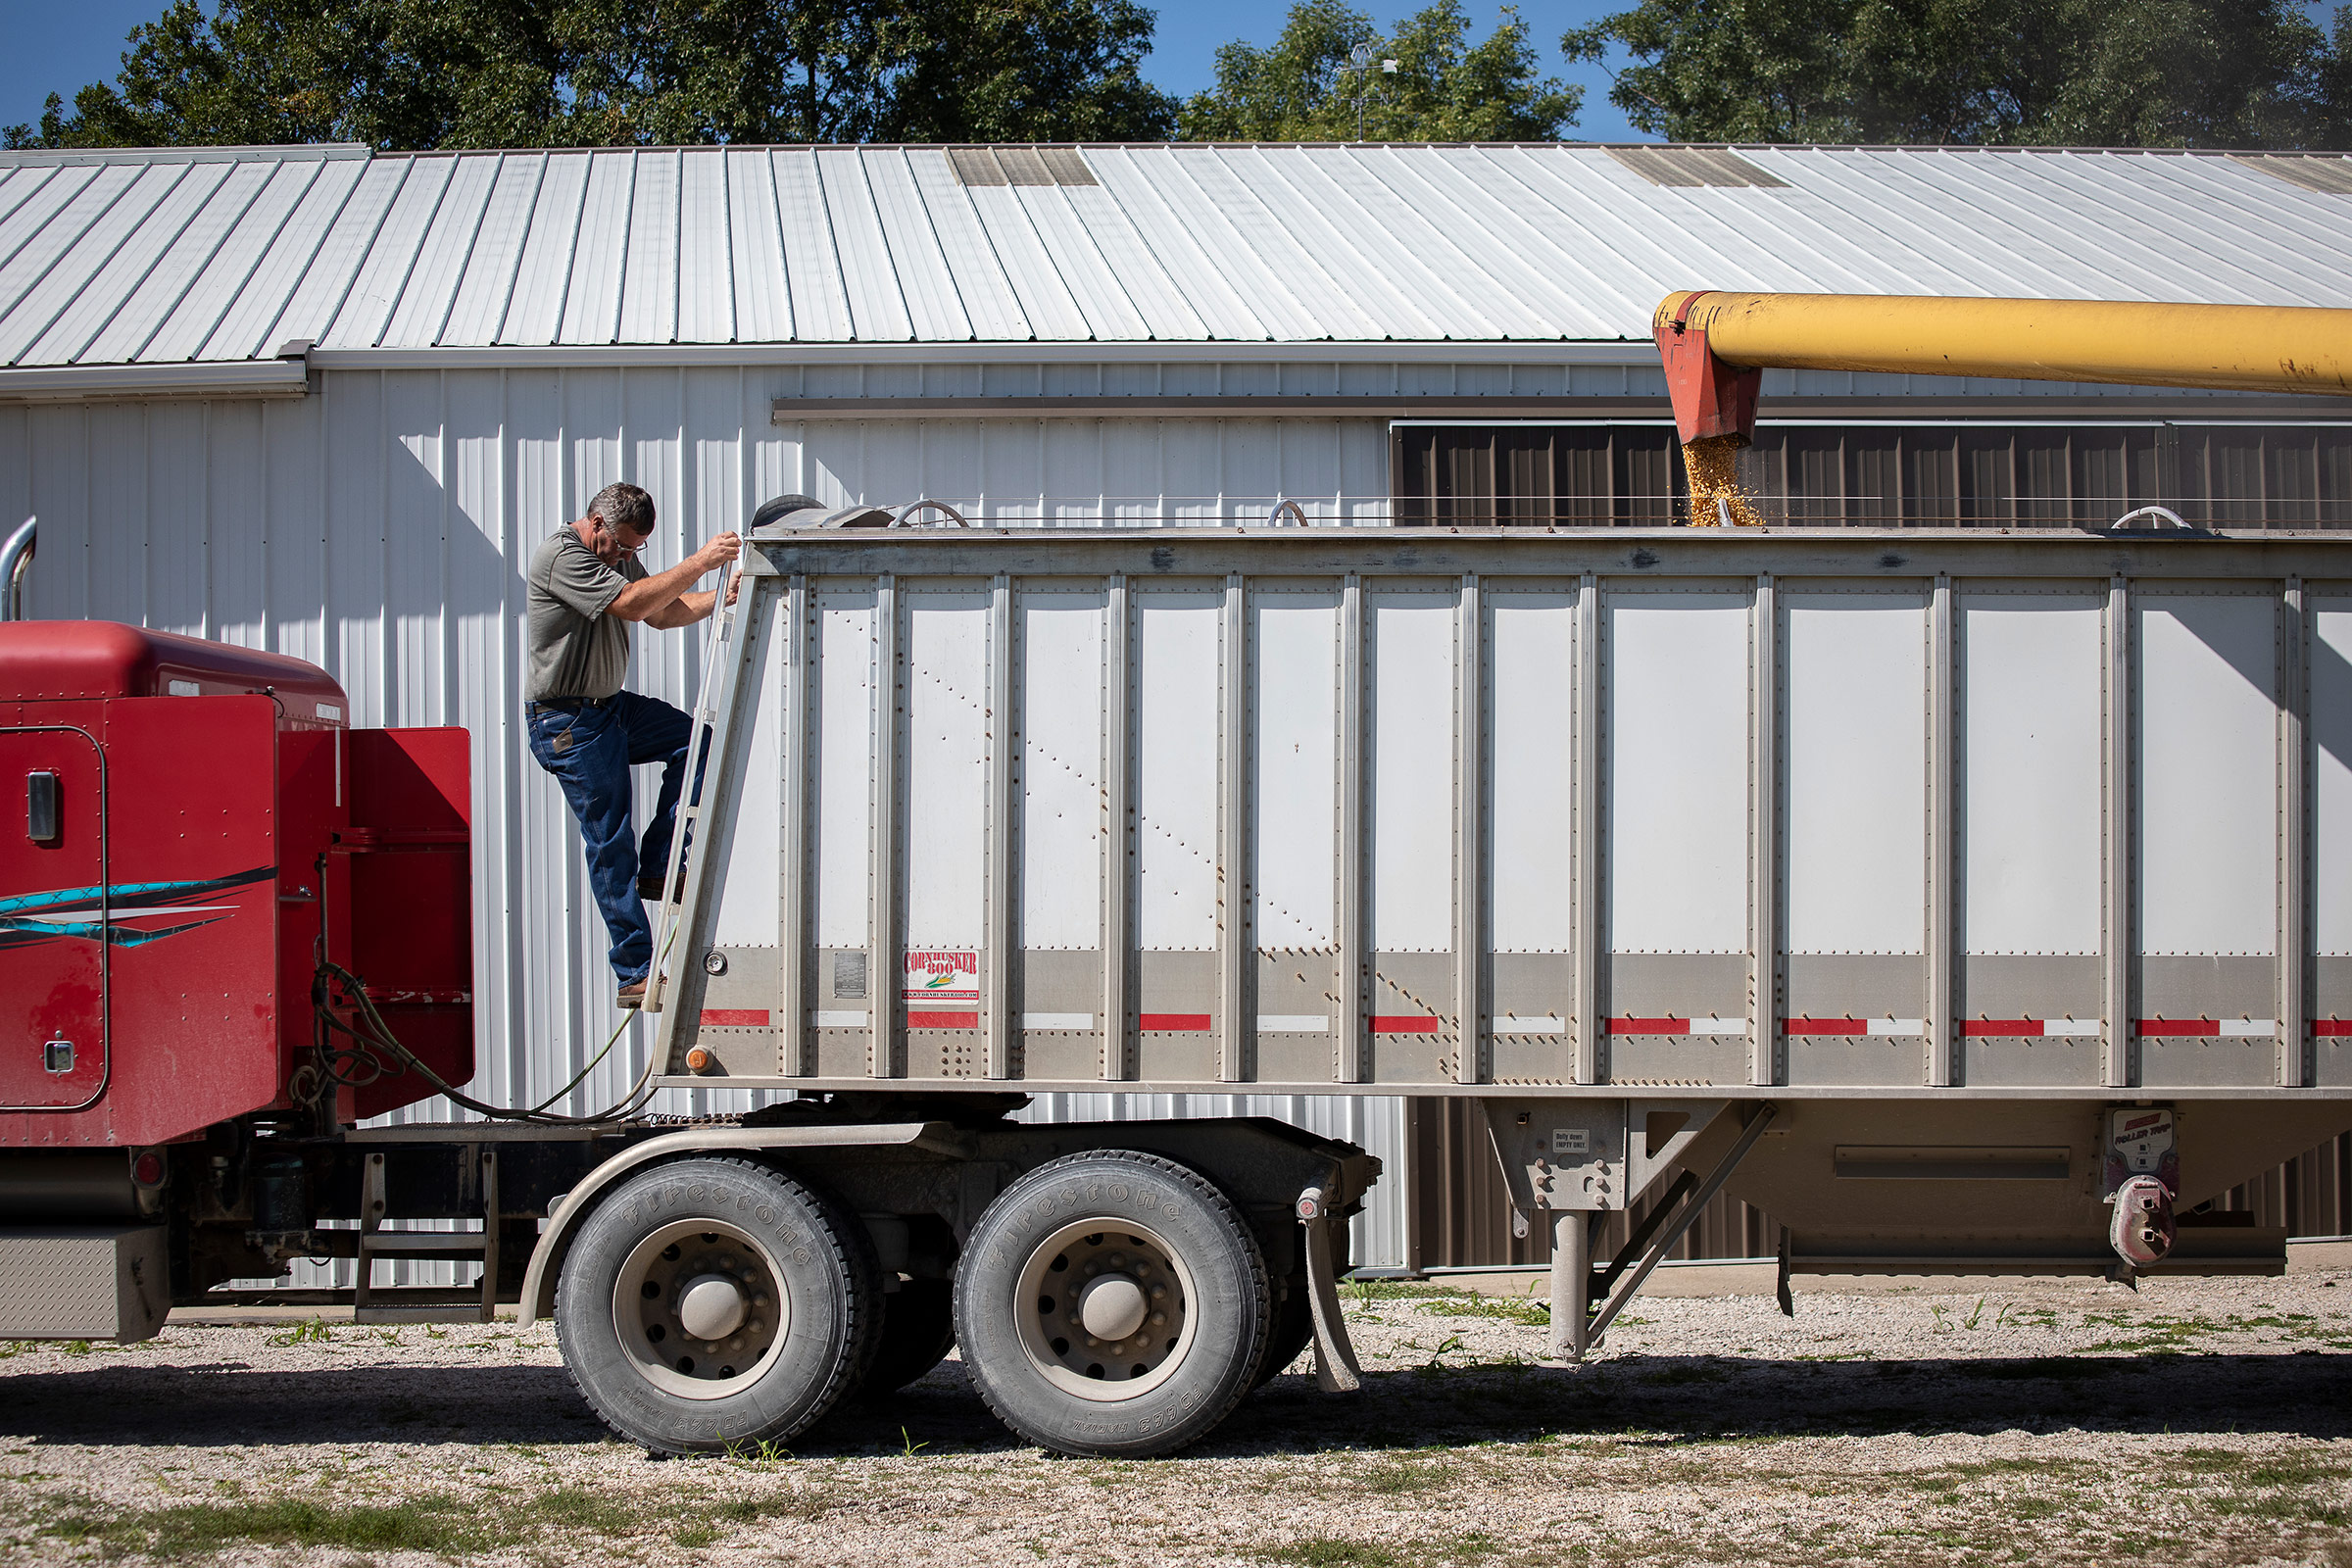 A farmer loads corn into his semi-tractor trailer used to haul grain to ethanol plants in Primghar, Iowa on Sept. 23, 2019. (Kathryn Gamble—The Washington Post/Getty Images)